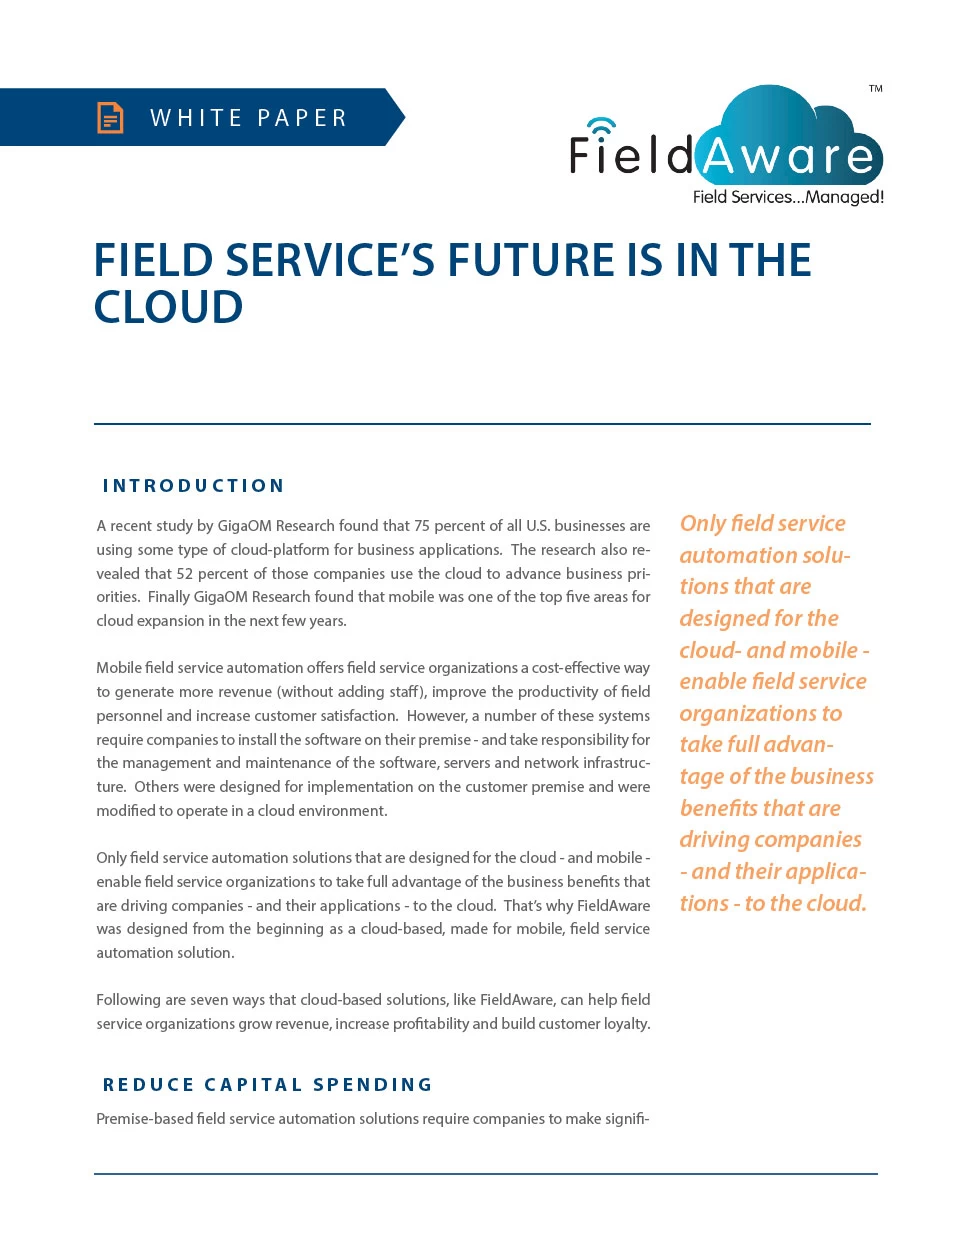 Field Service's Future Is In The Cloud White Paper